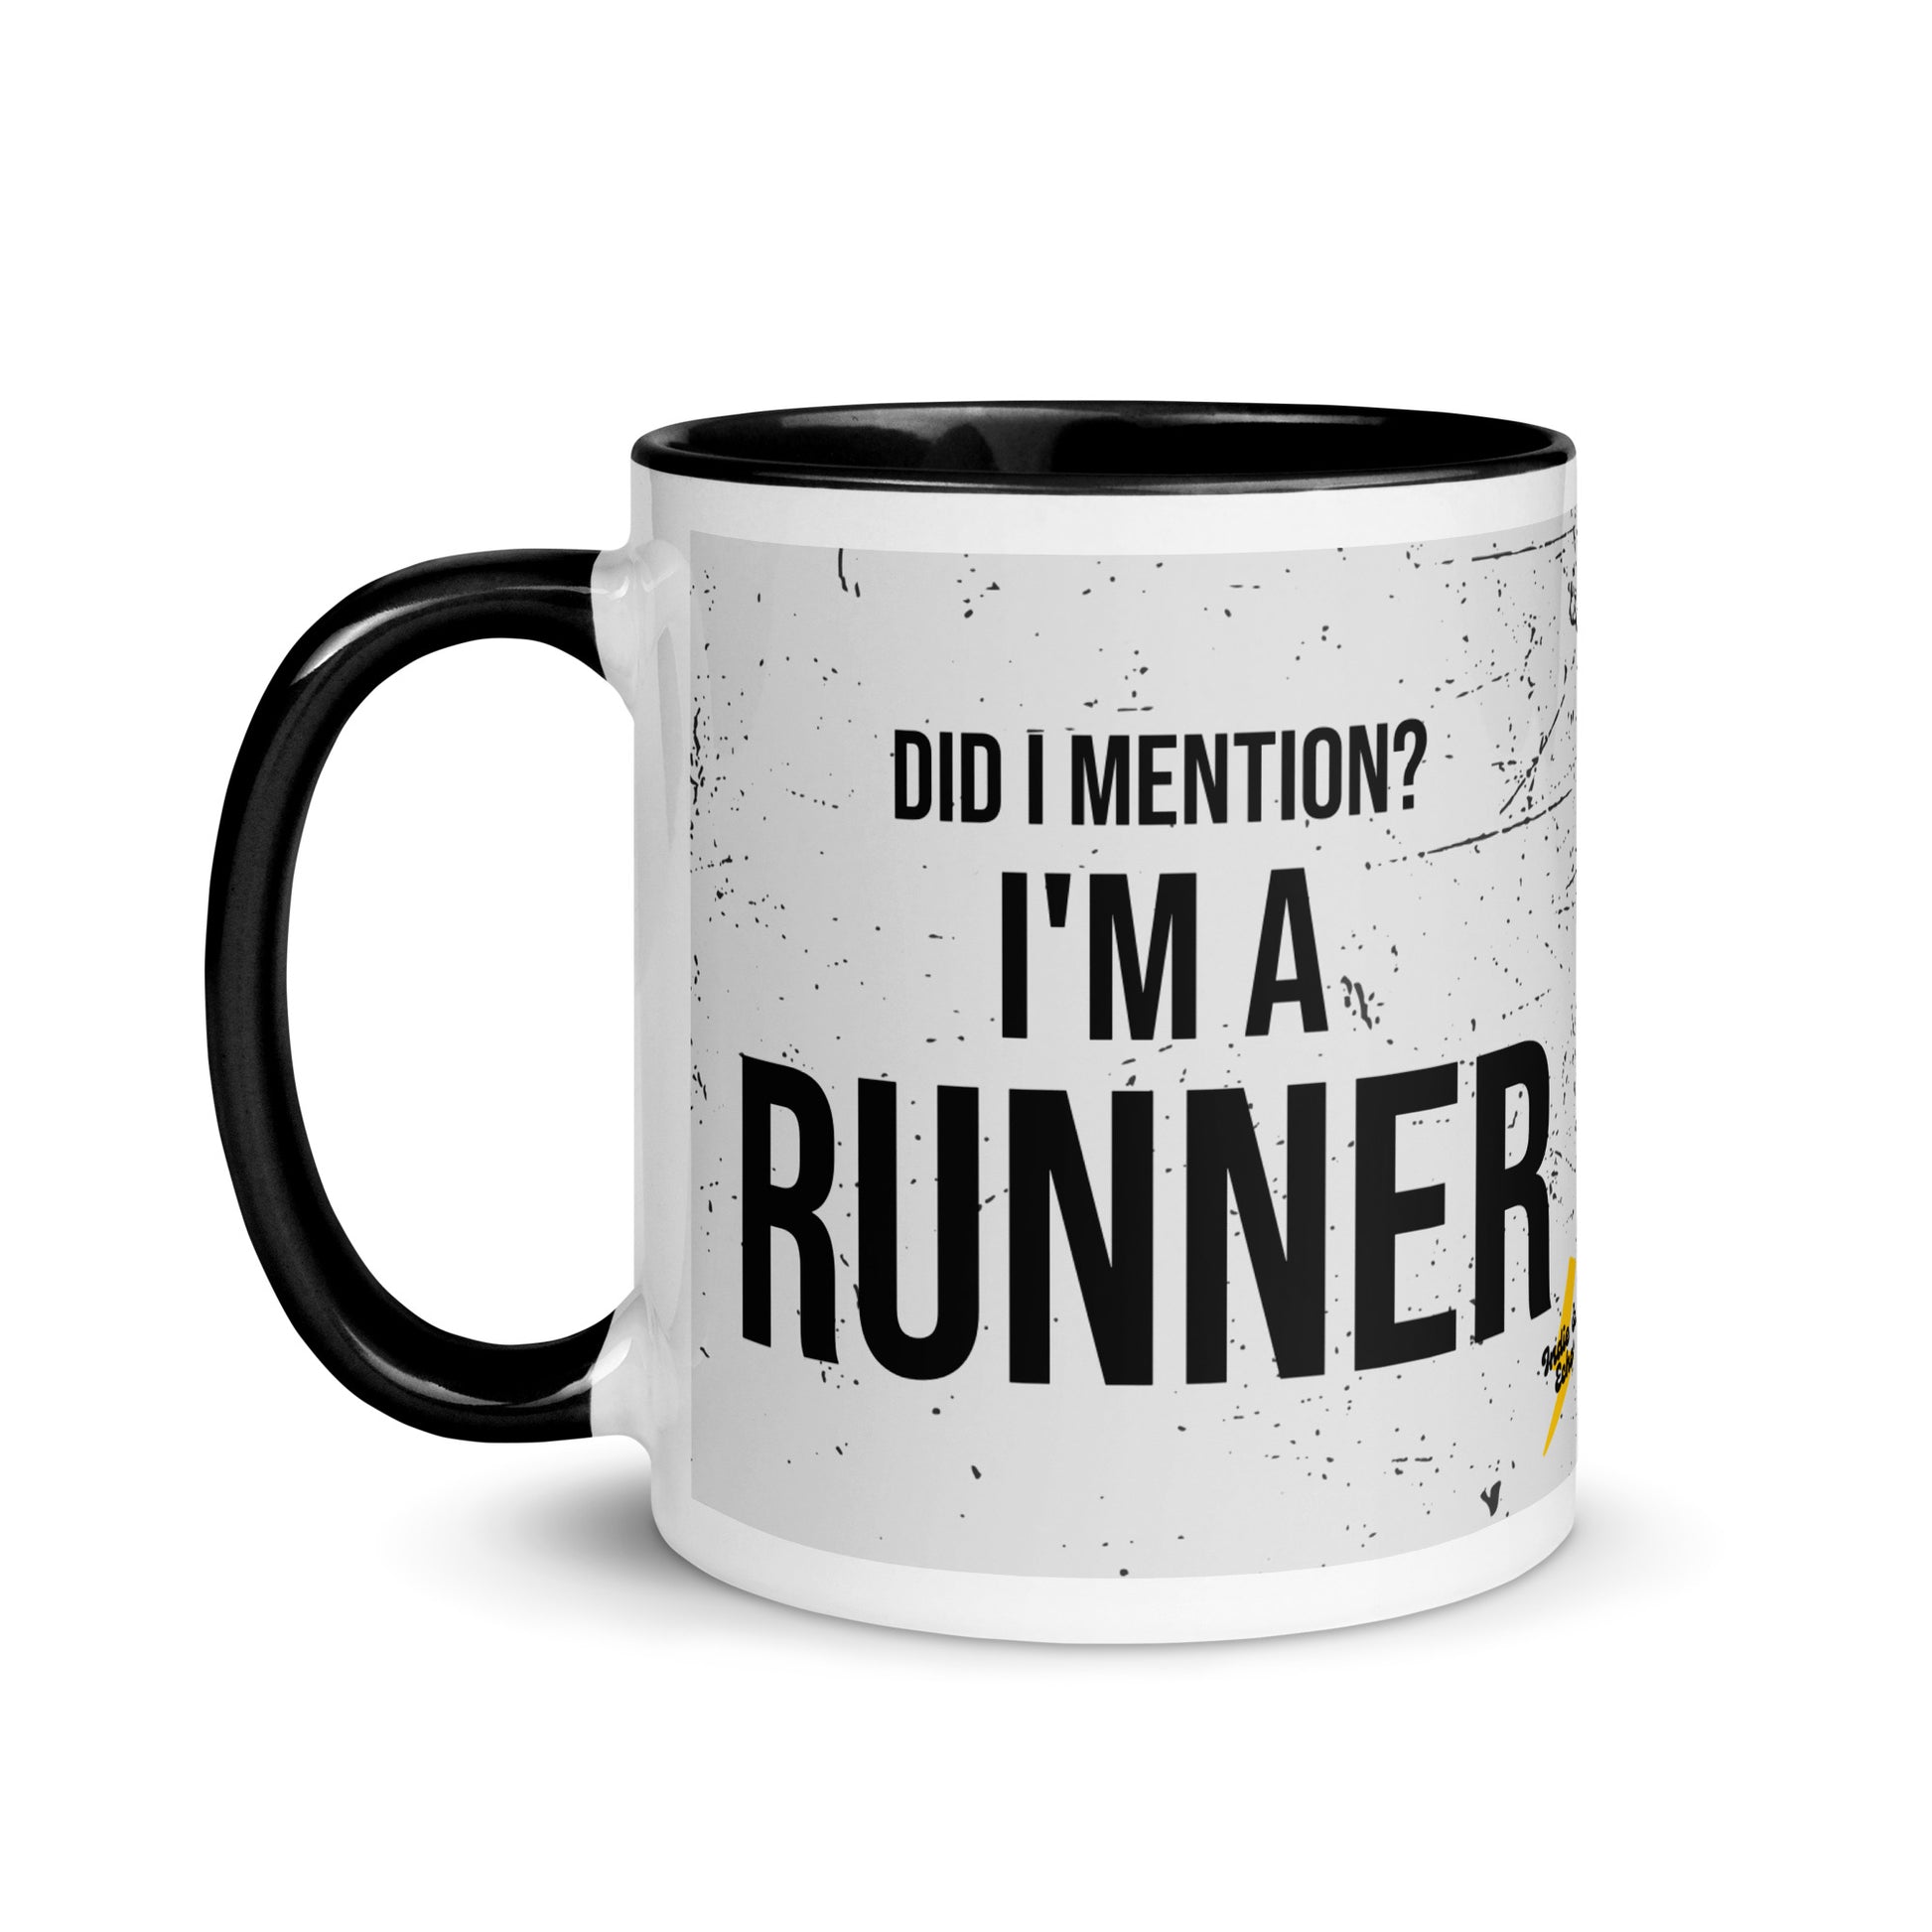 Mug with black handle and a grey splatter print design with the phrase did I mention? I'm a runner across the front. A nice gift for a running friend. 